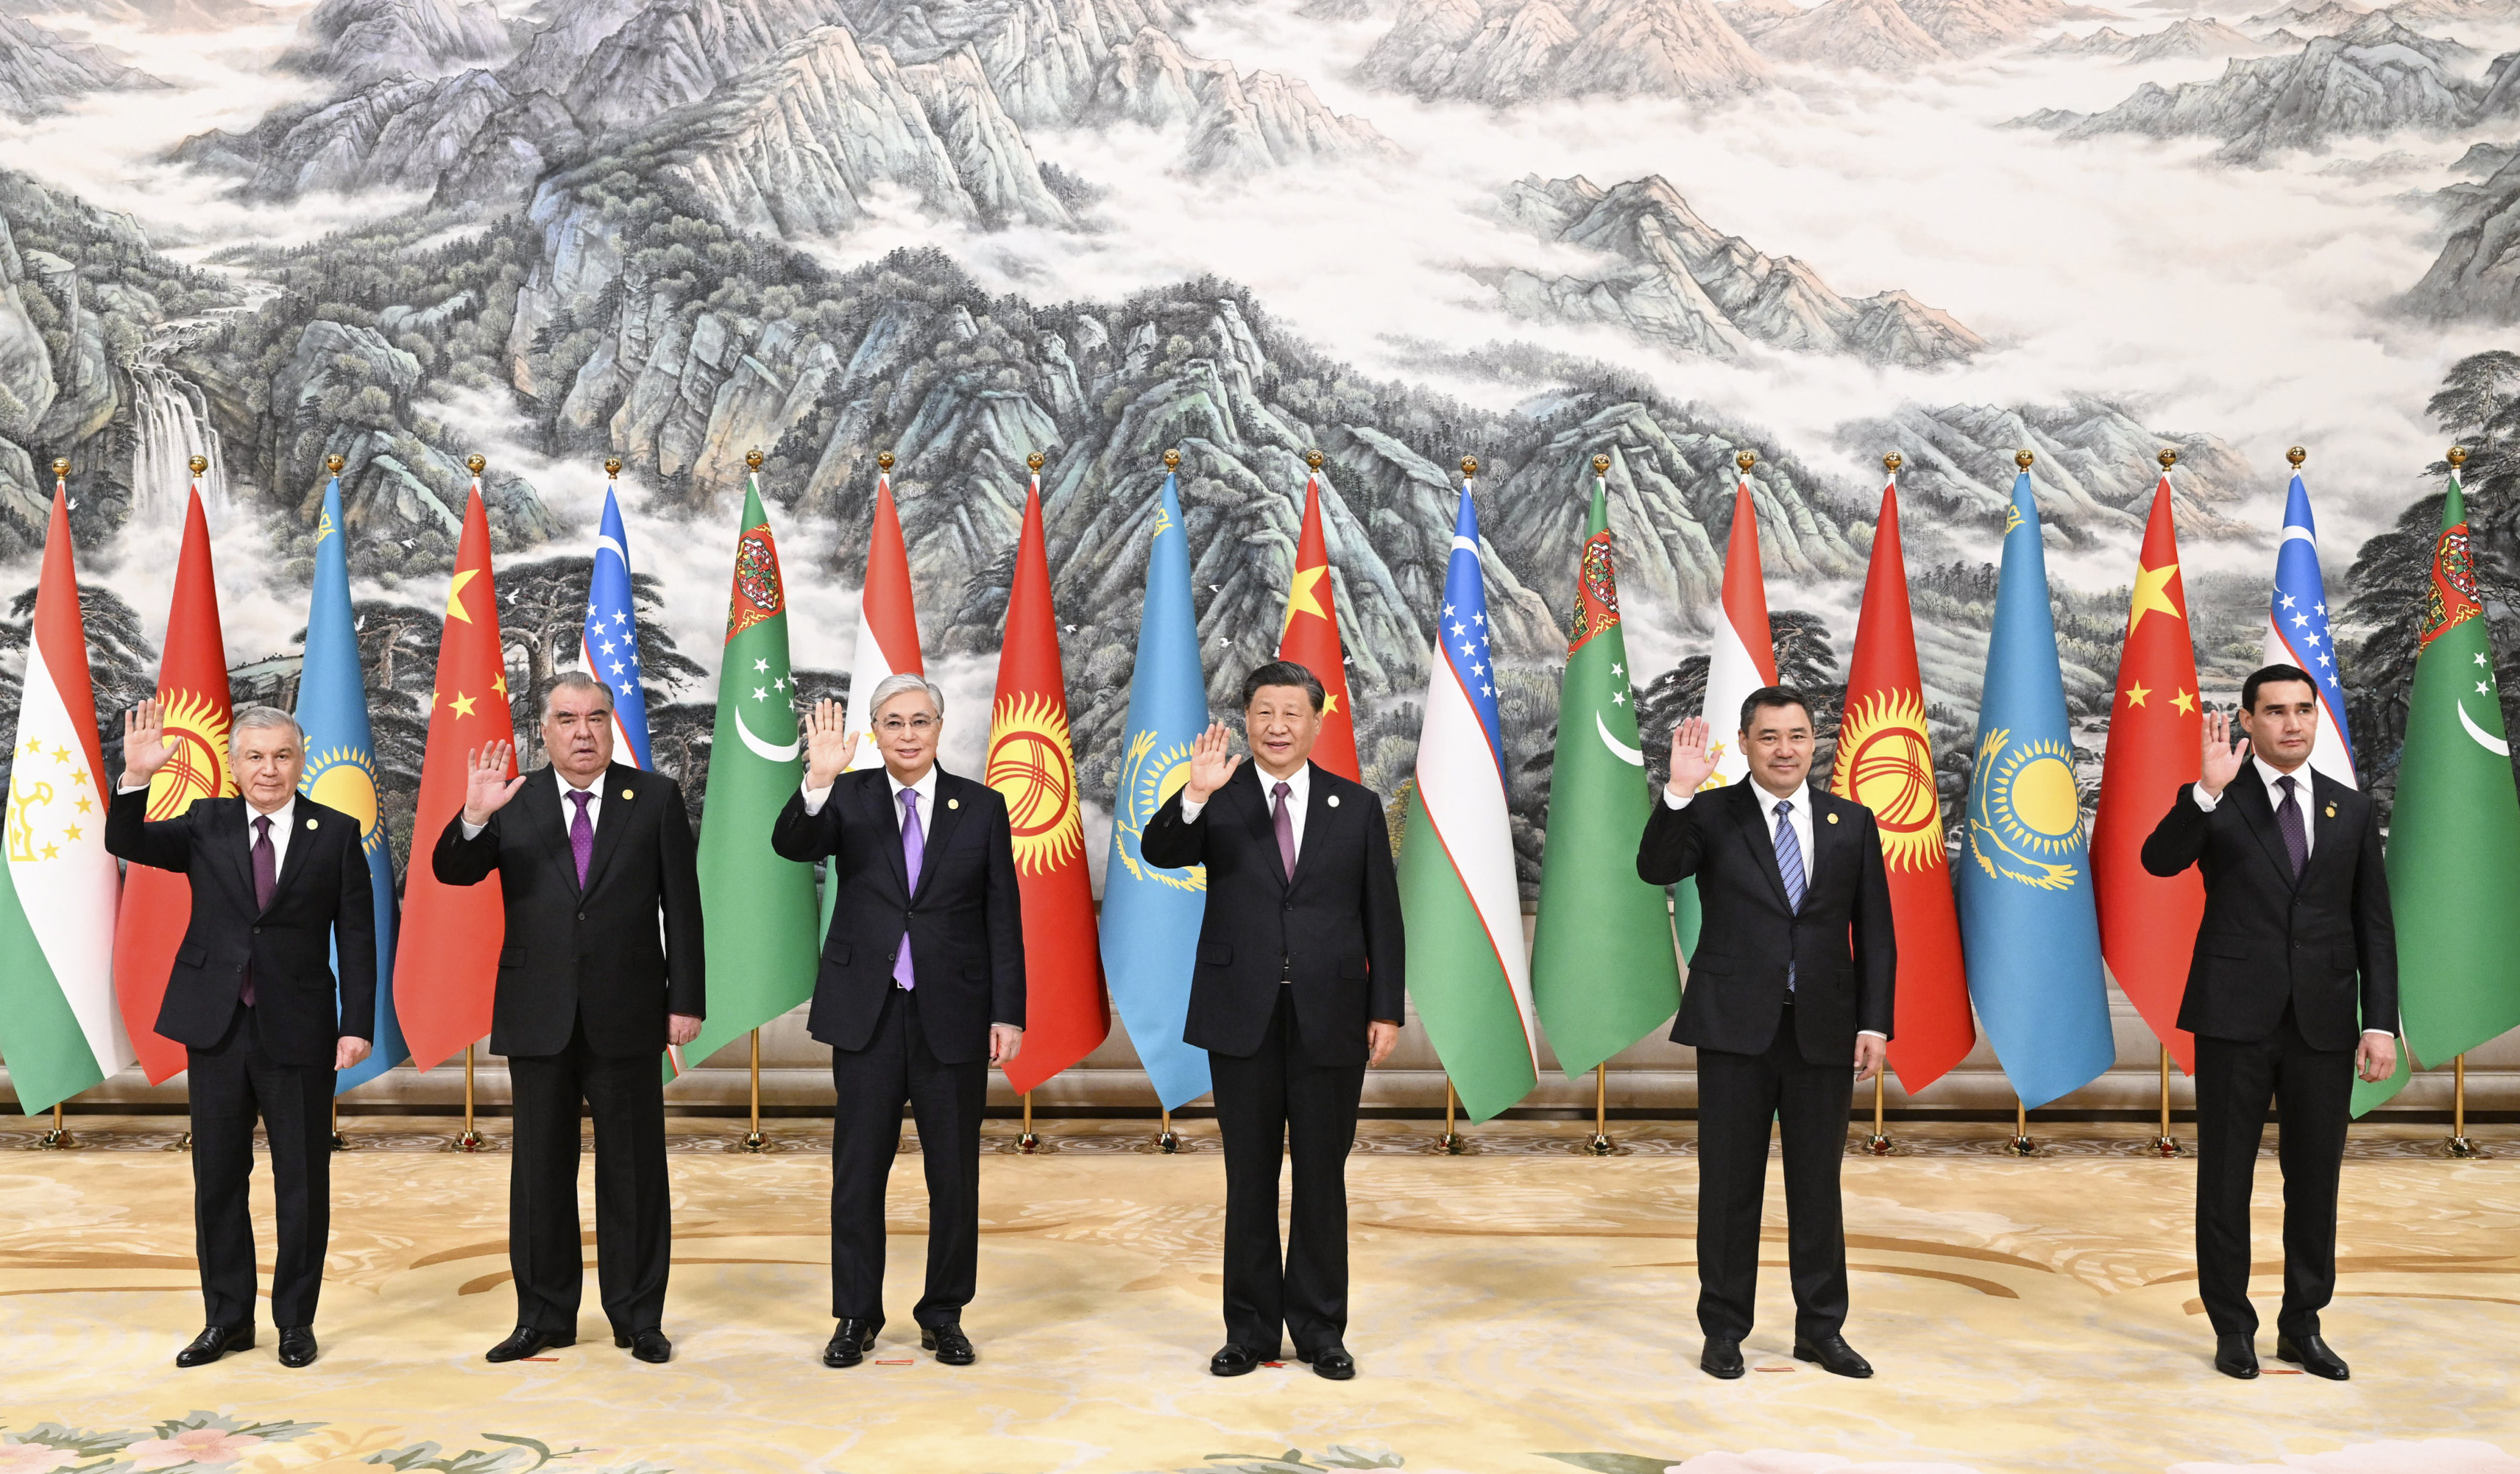 Chinese President Xi Jinping (third from right) underscored the historical and practical links between China and central Asian states during the summit in Xian. Photo: Xinhua